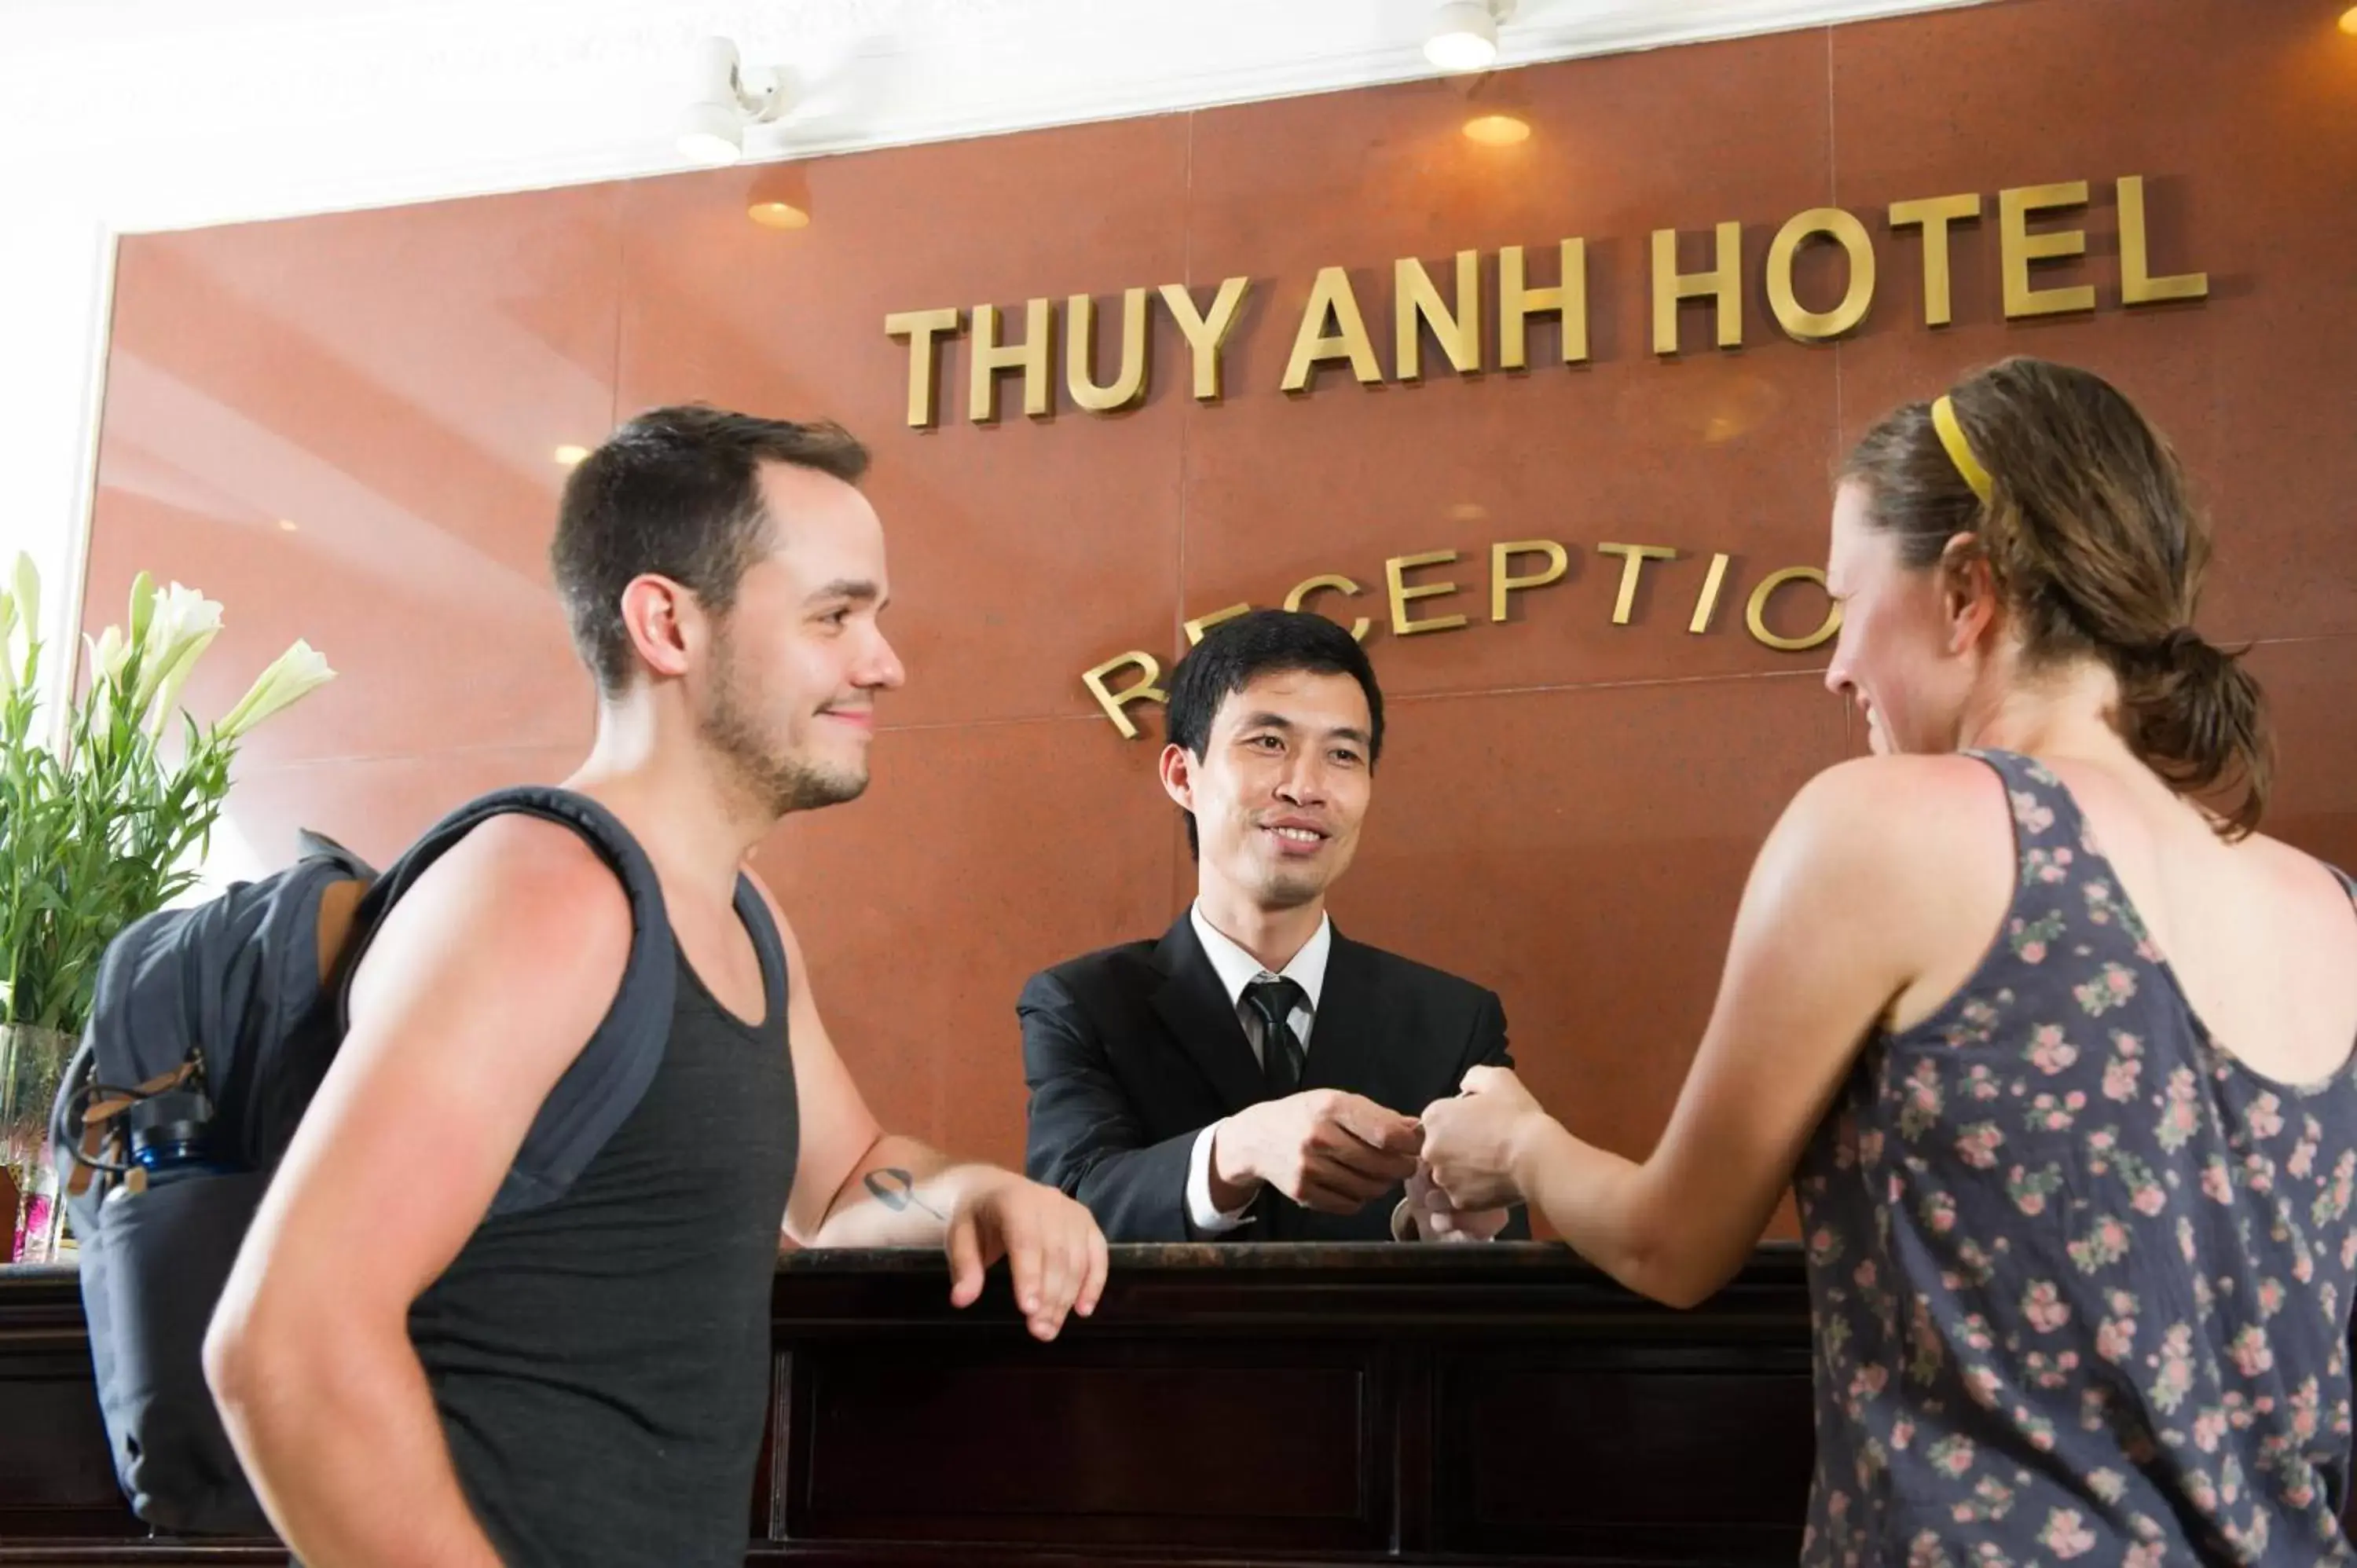 Lobby or reception in Thuy Anh Hotel